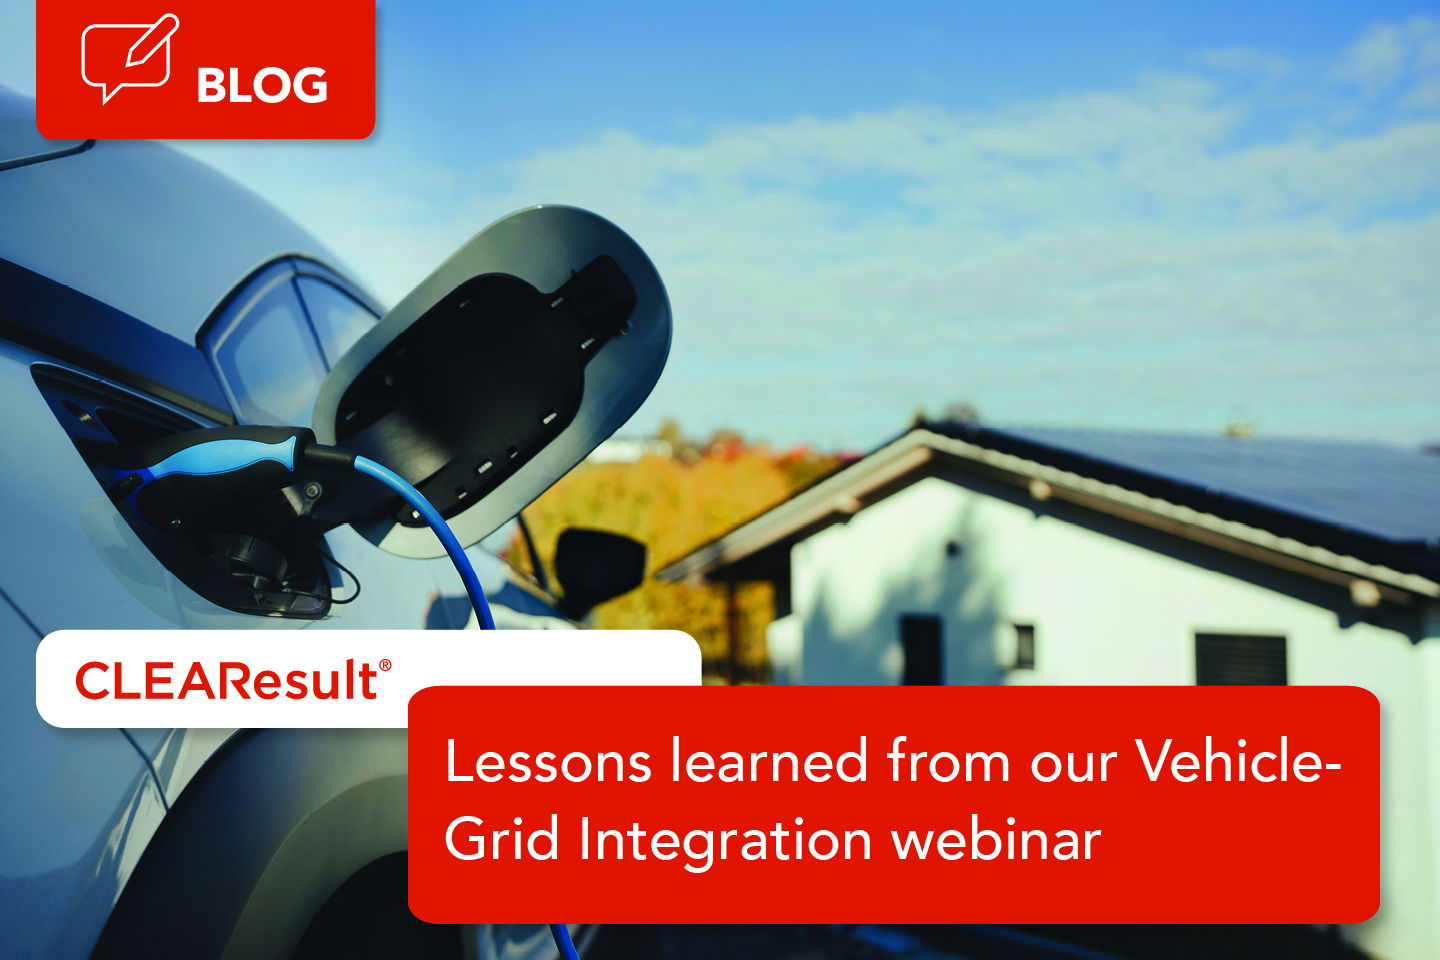 Lessons learned from our Vehicle-Grid Integration webinar